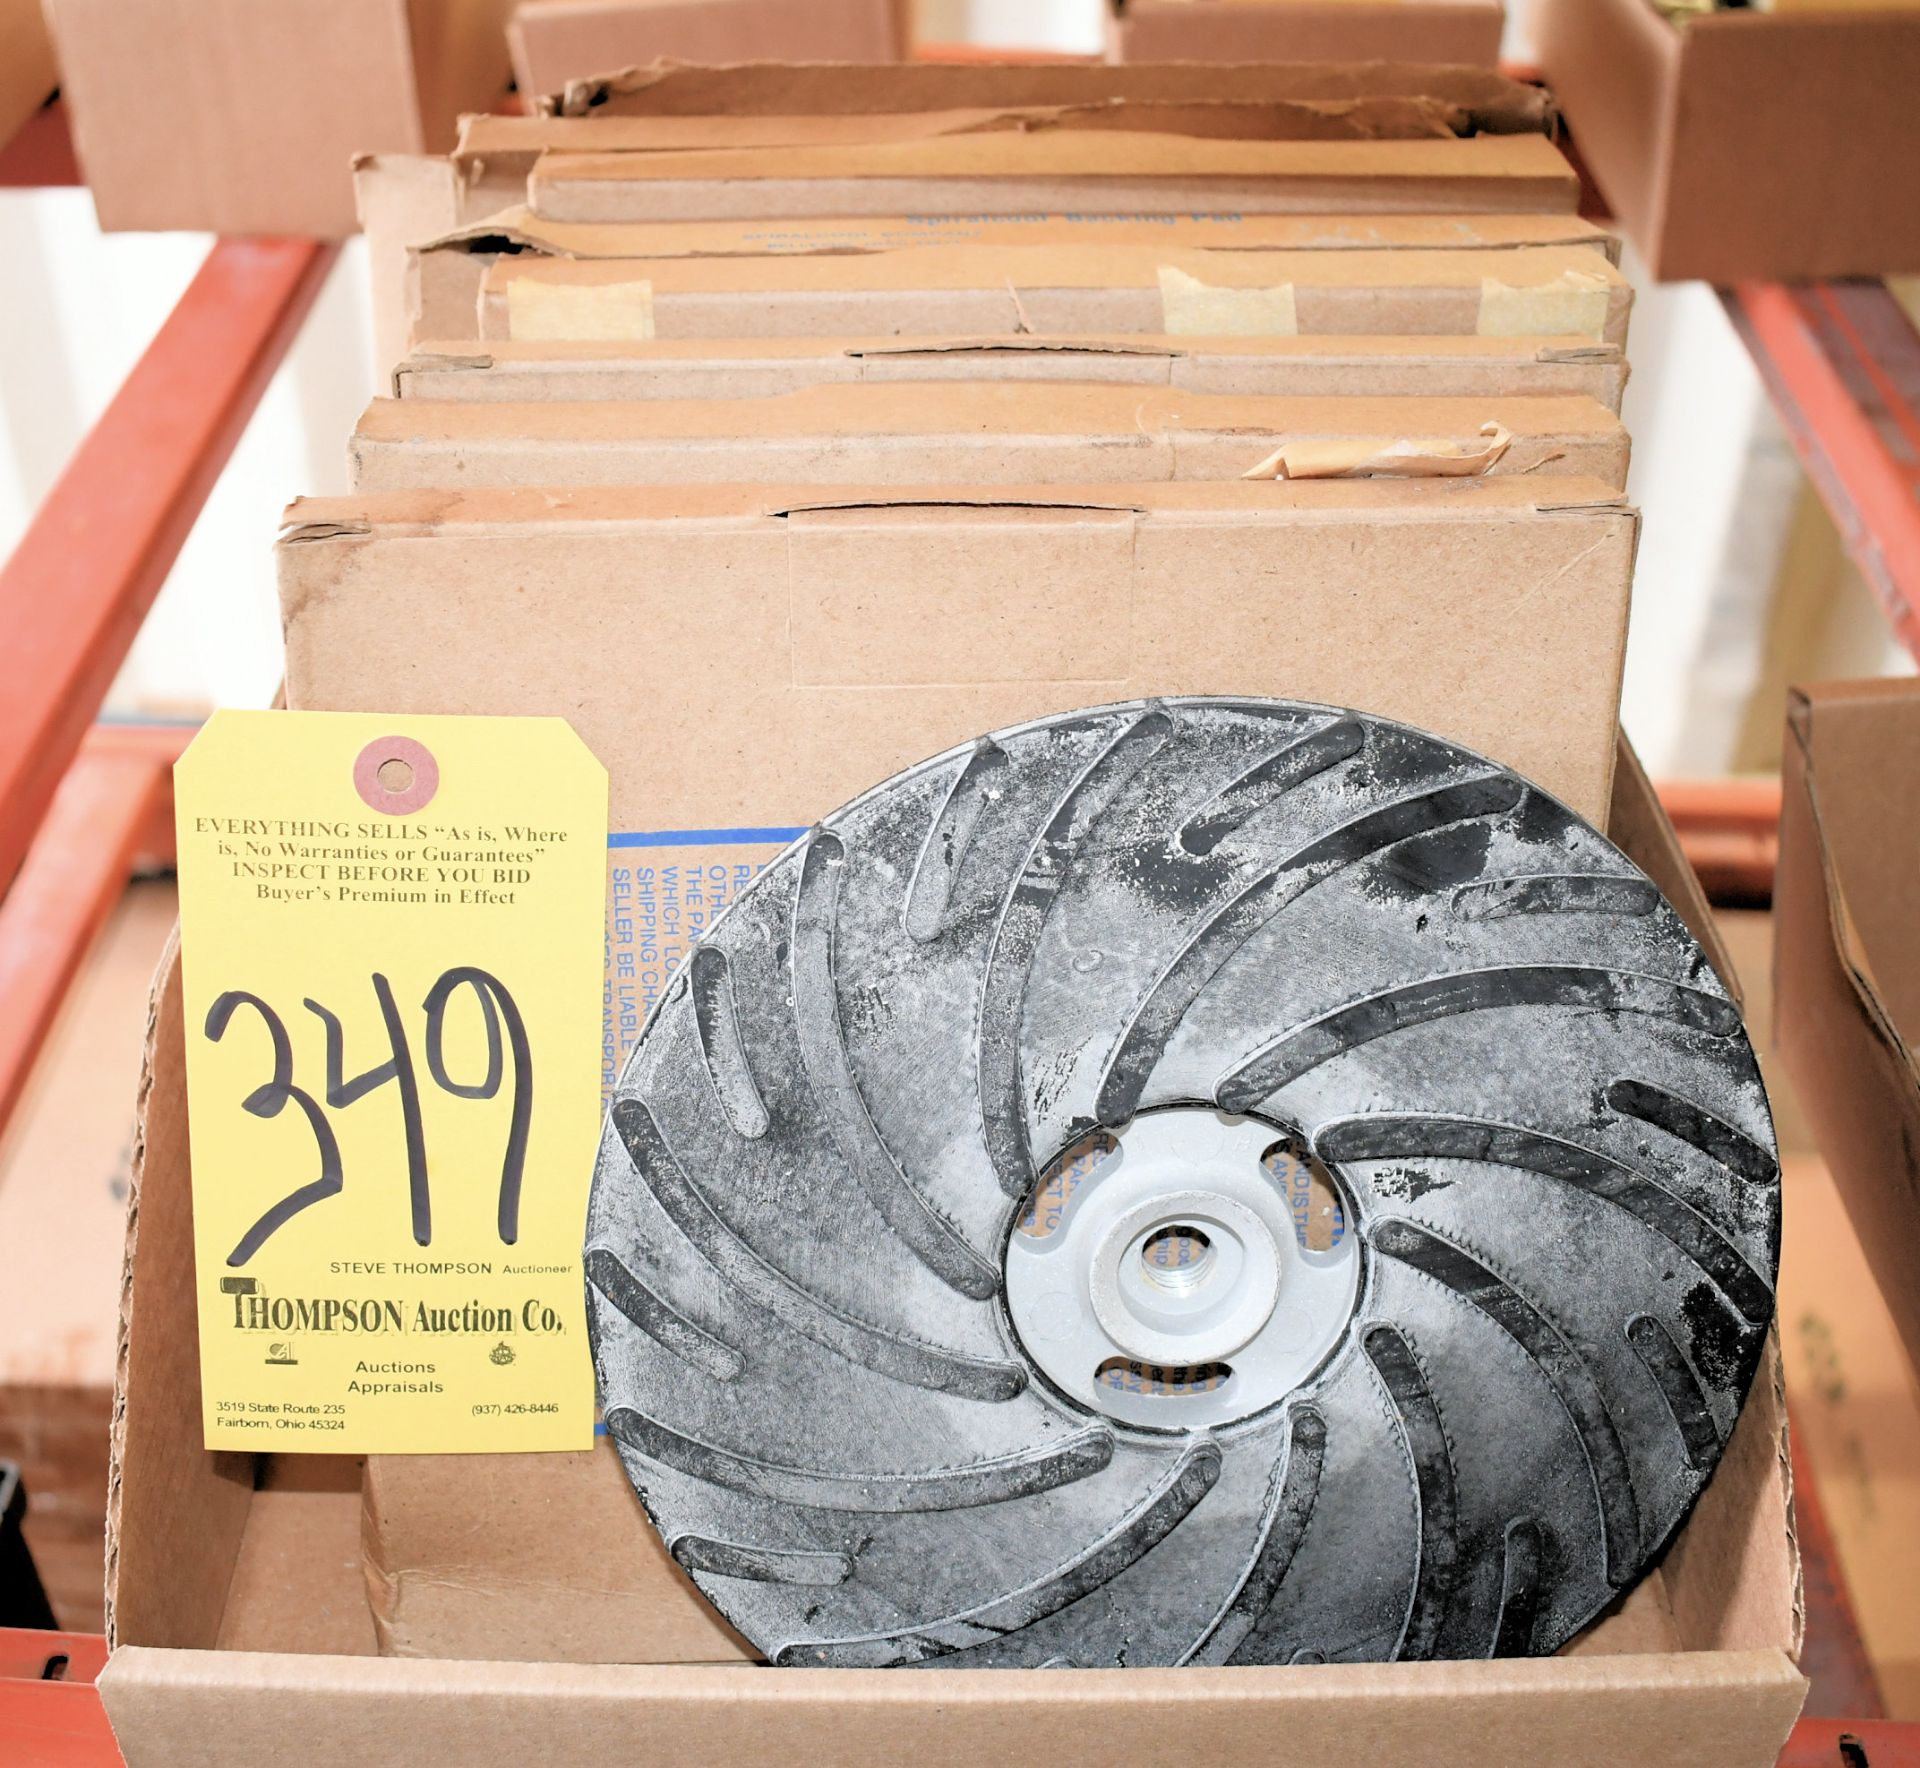 Lot-8 1/2" Grinder Backing Pads in (1) Box, (Container 2)